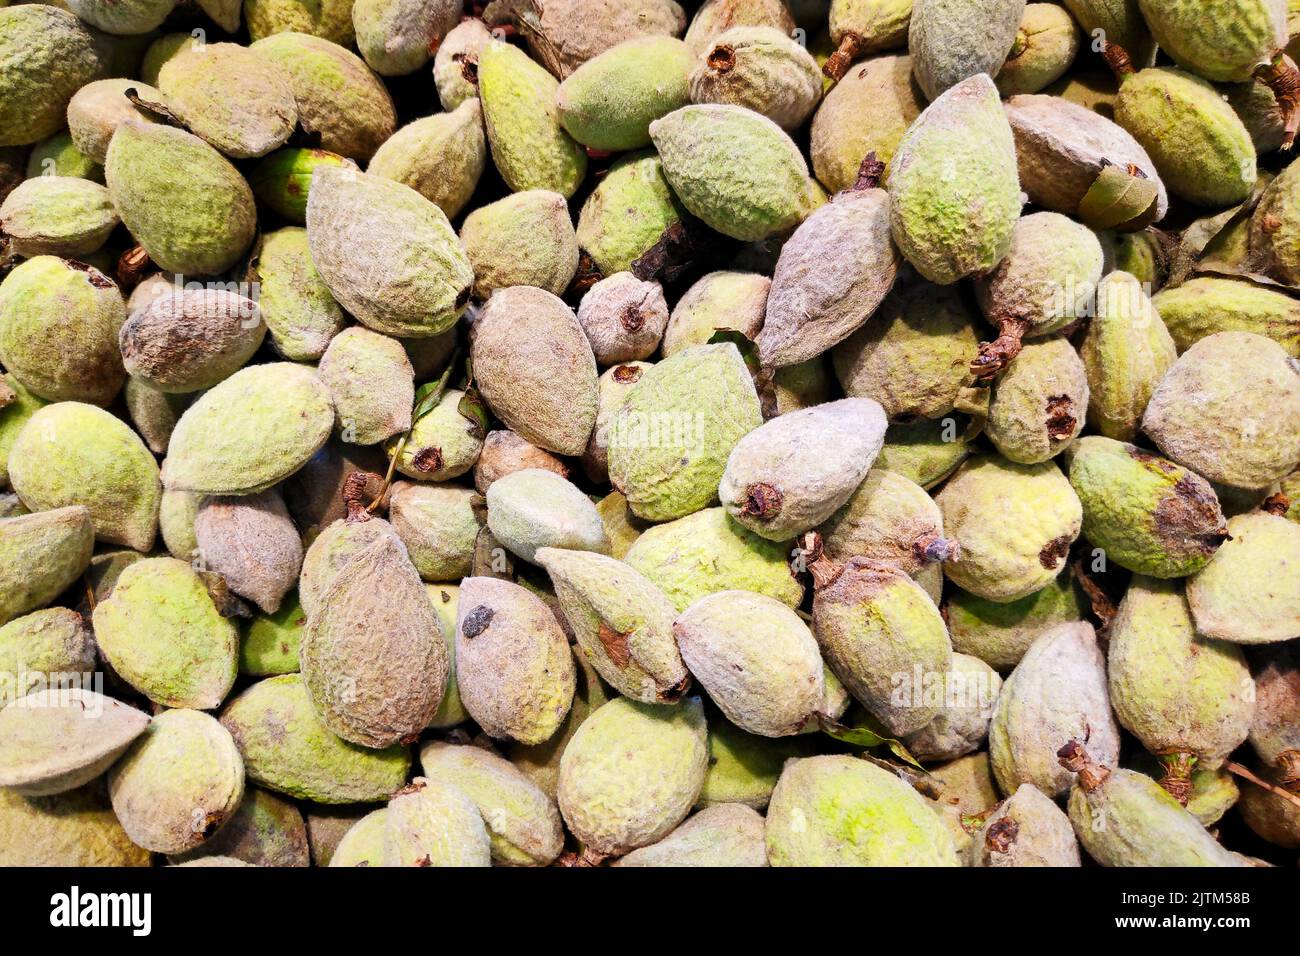 Close-up on a stack of green almonds for sale on a market stall. Stock Photo